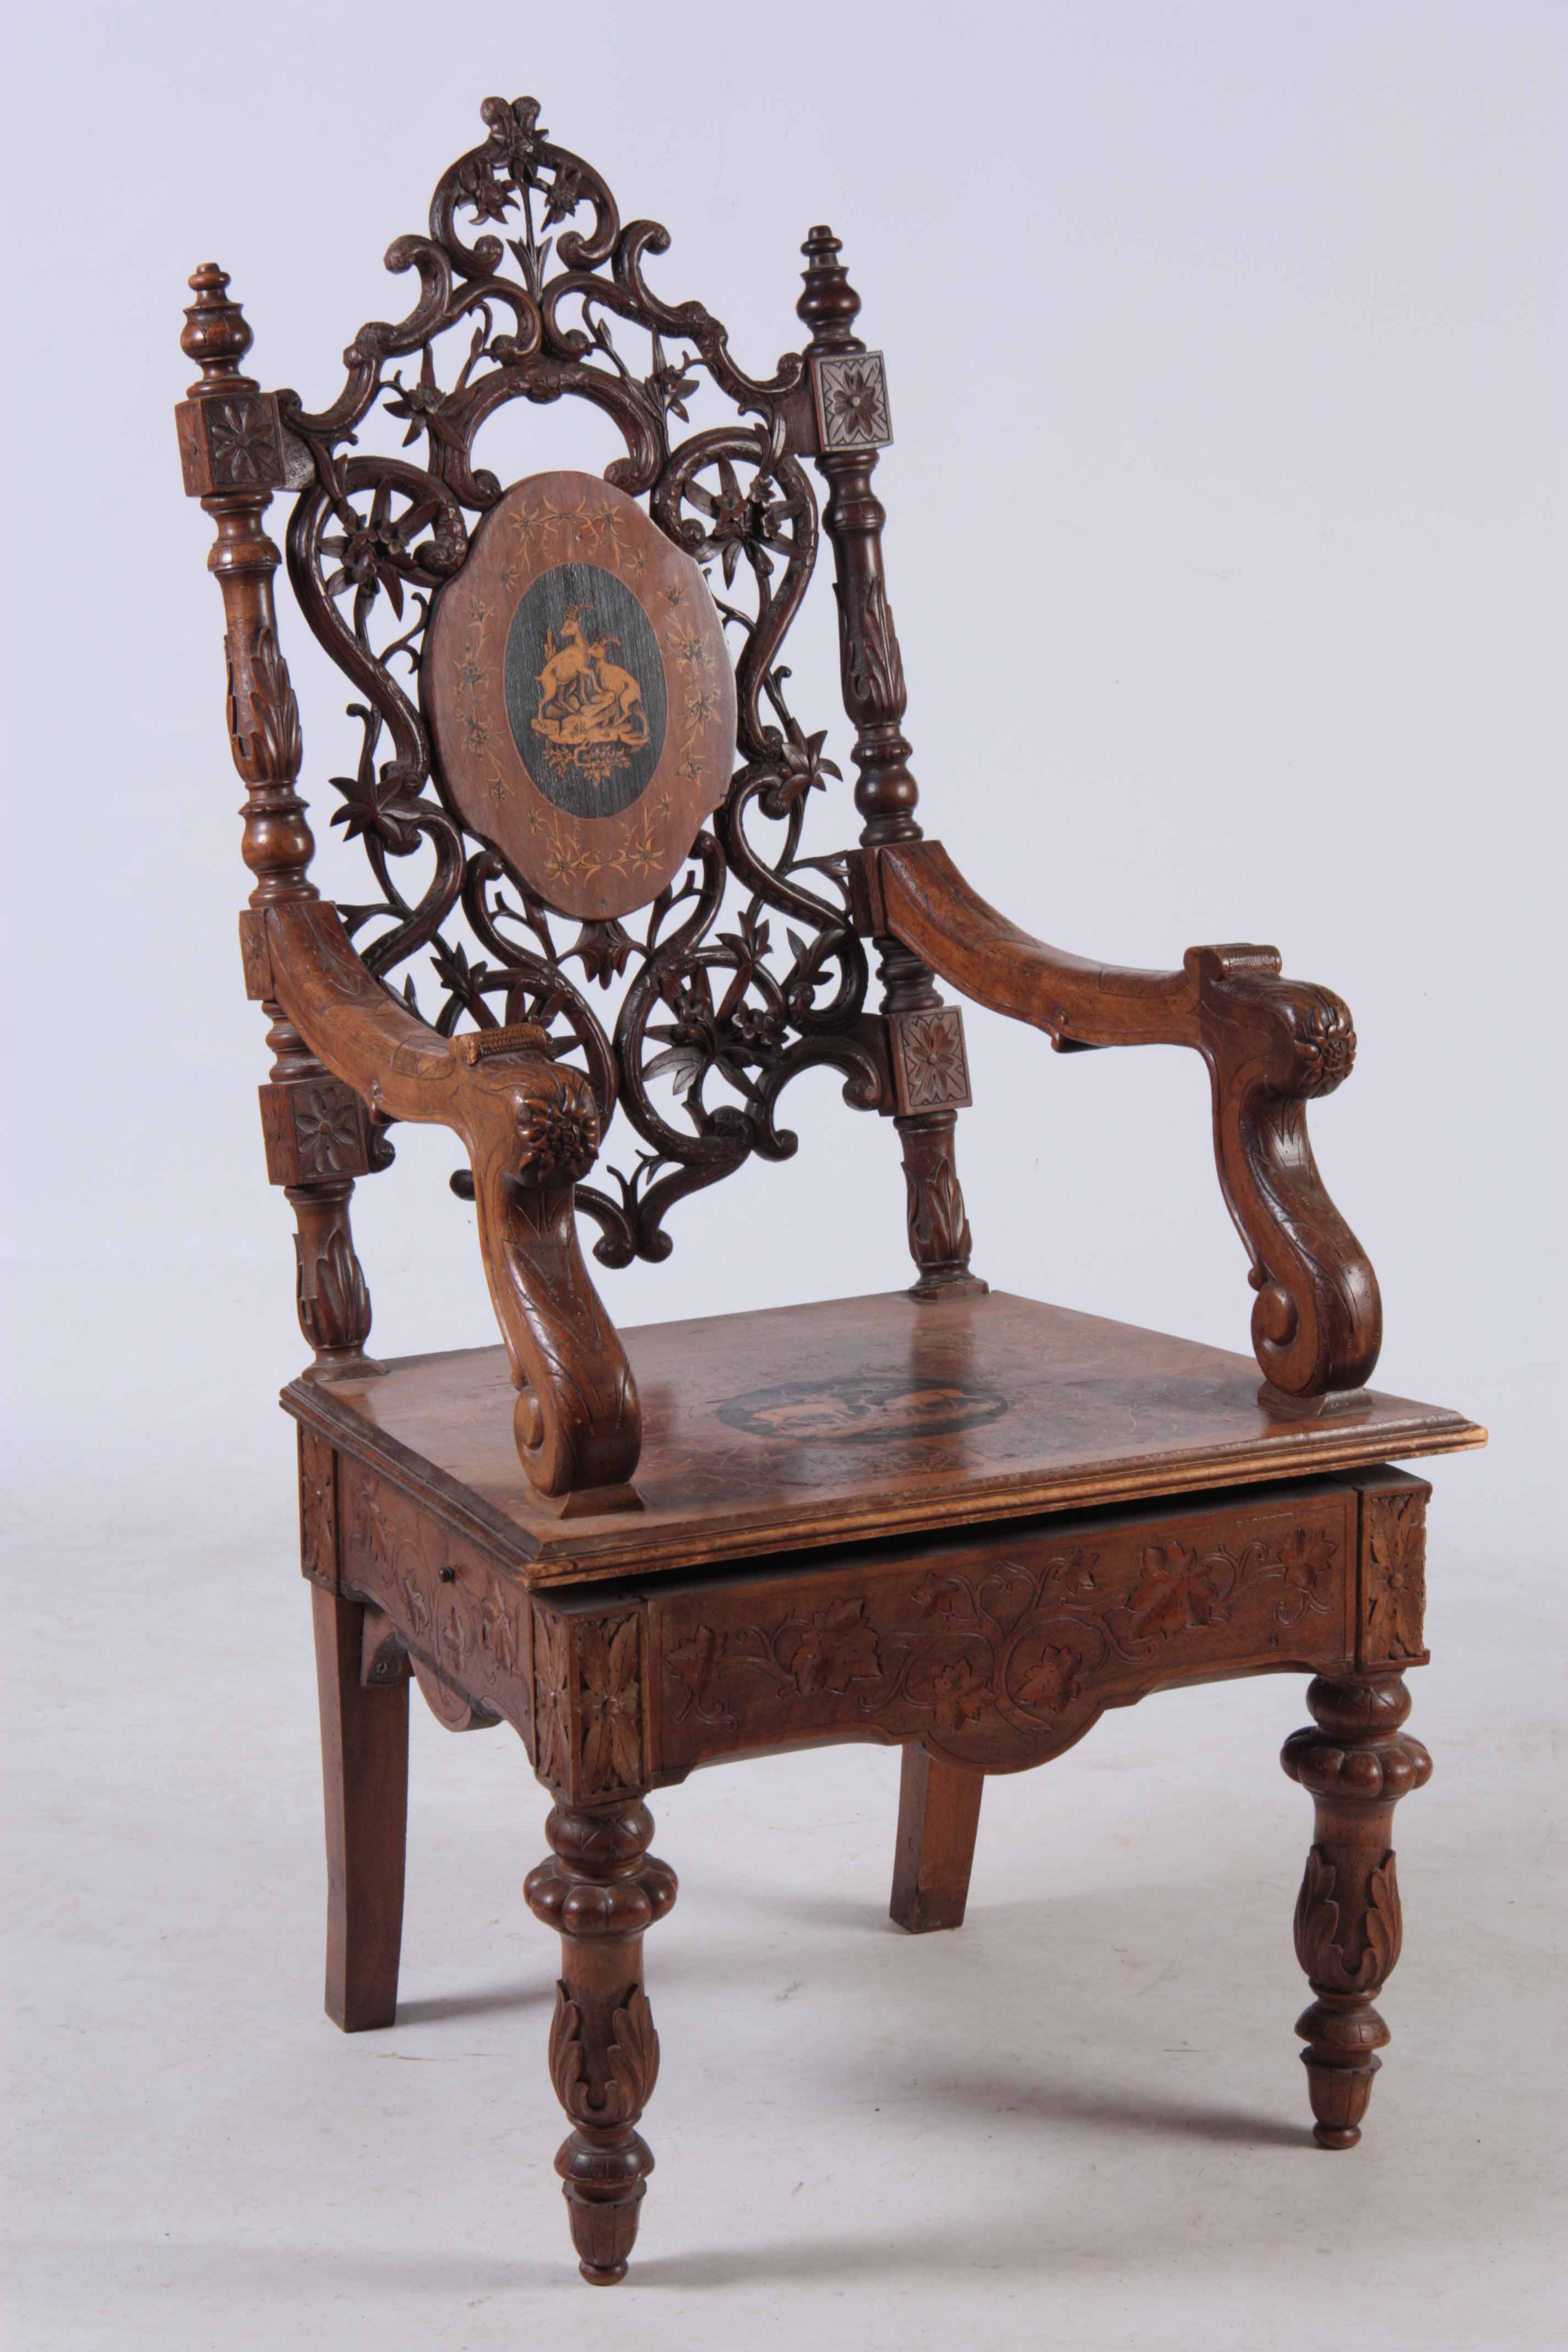 A 19TH CENTURY WALNUT BLACK FOREST MUSICAL ARMCHAIR with marquetry inlaid panels surrounded by - Image 3 of 8